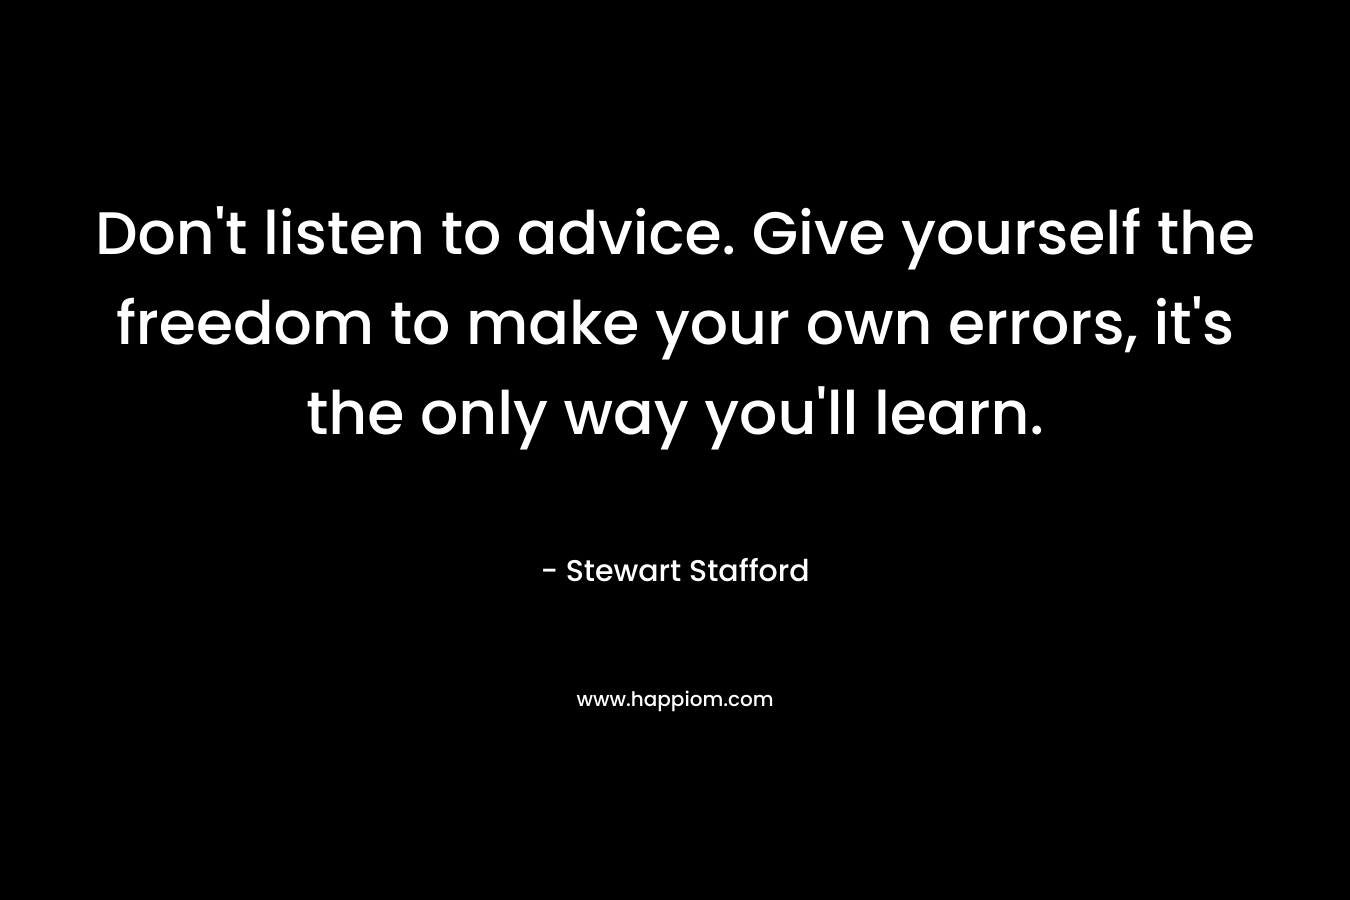 Don't listen to advice. Give yourself the freedom to make your own errors, it's the only way you'll learn.